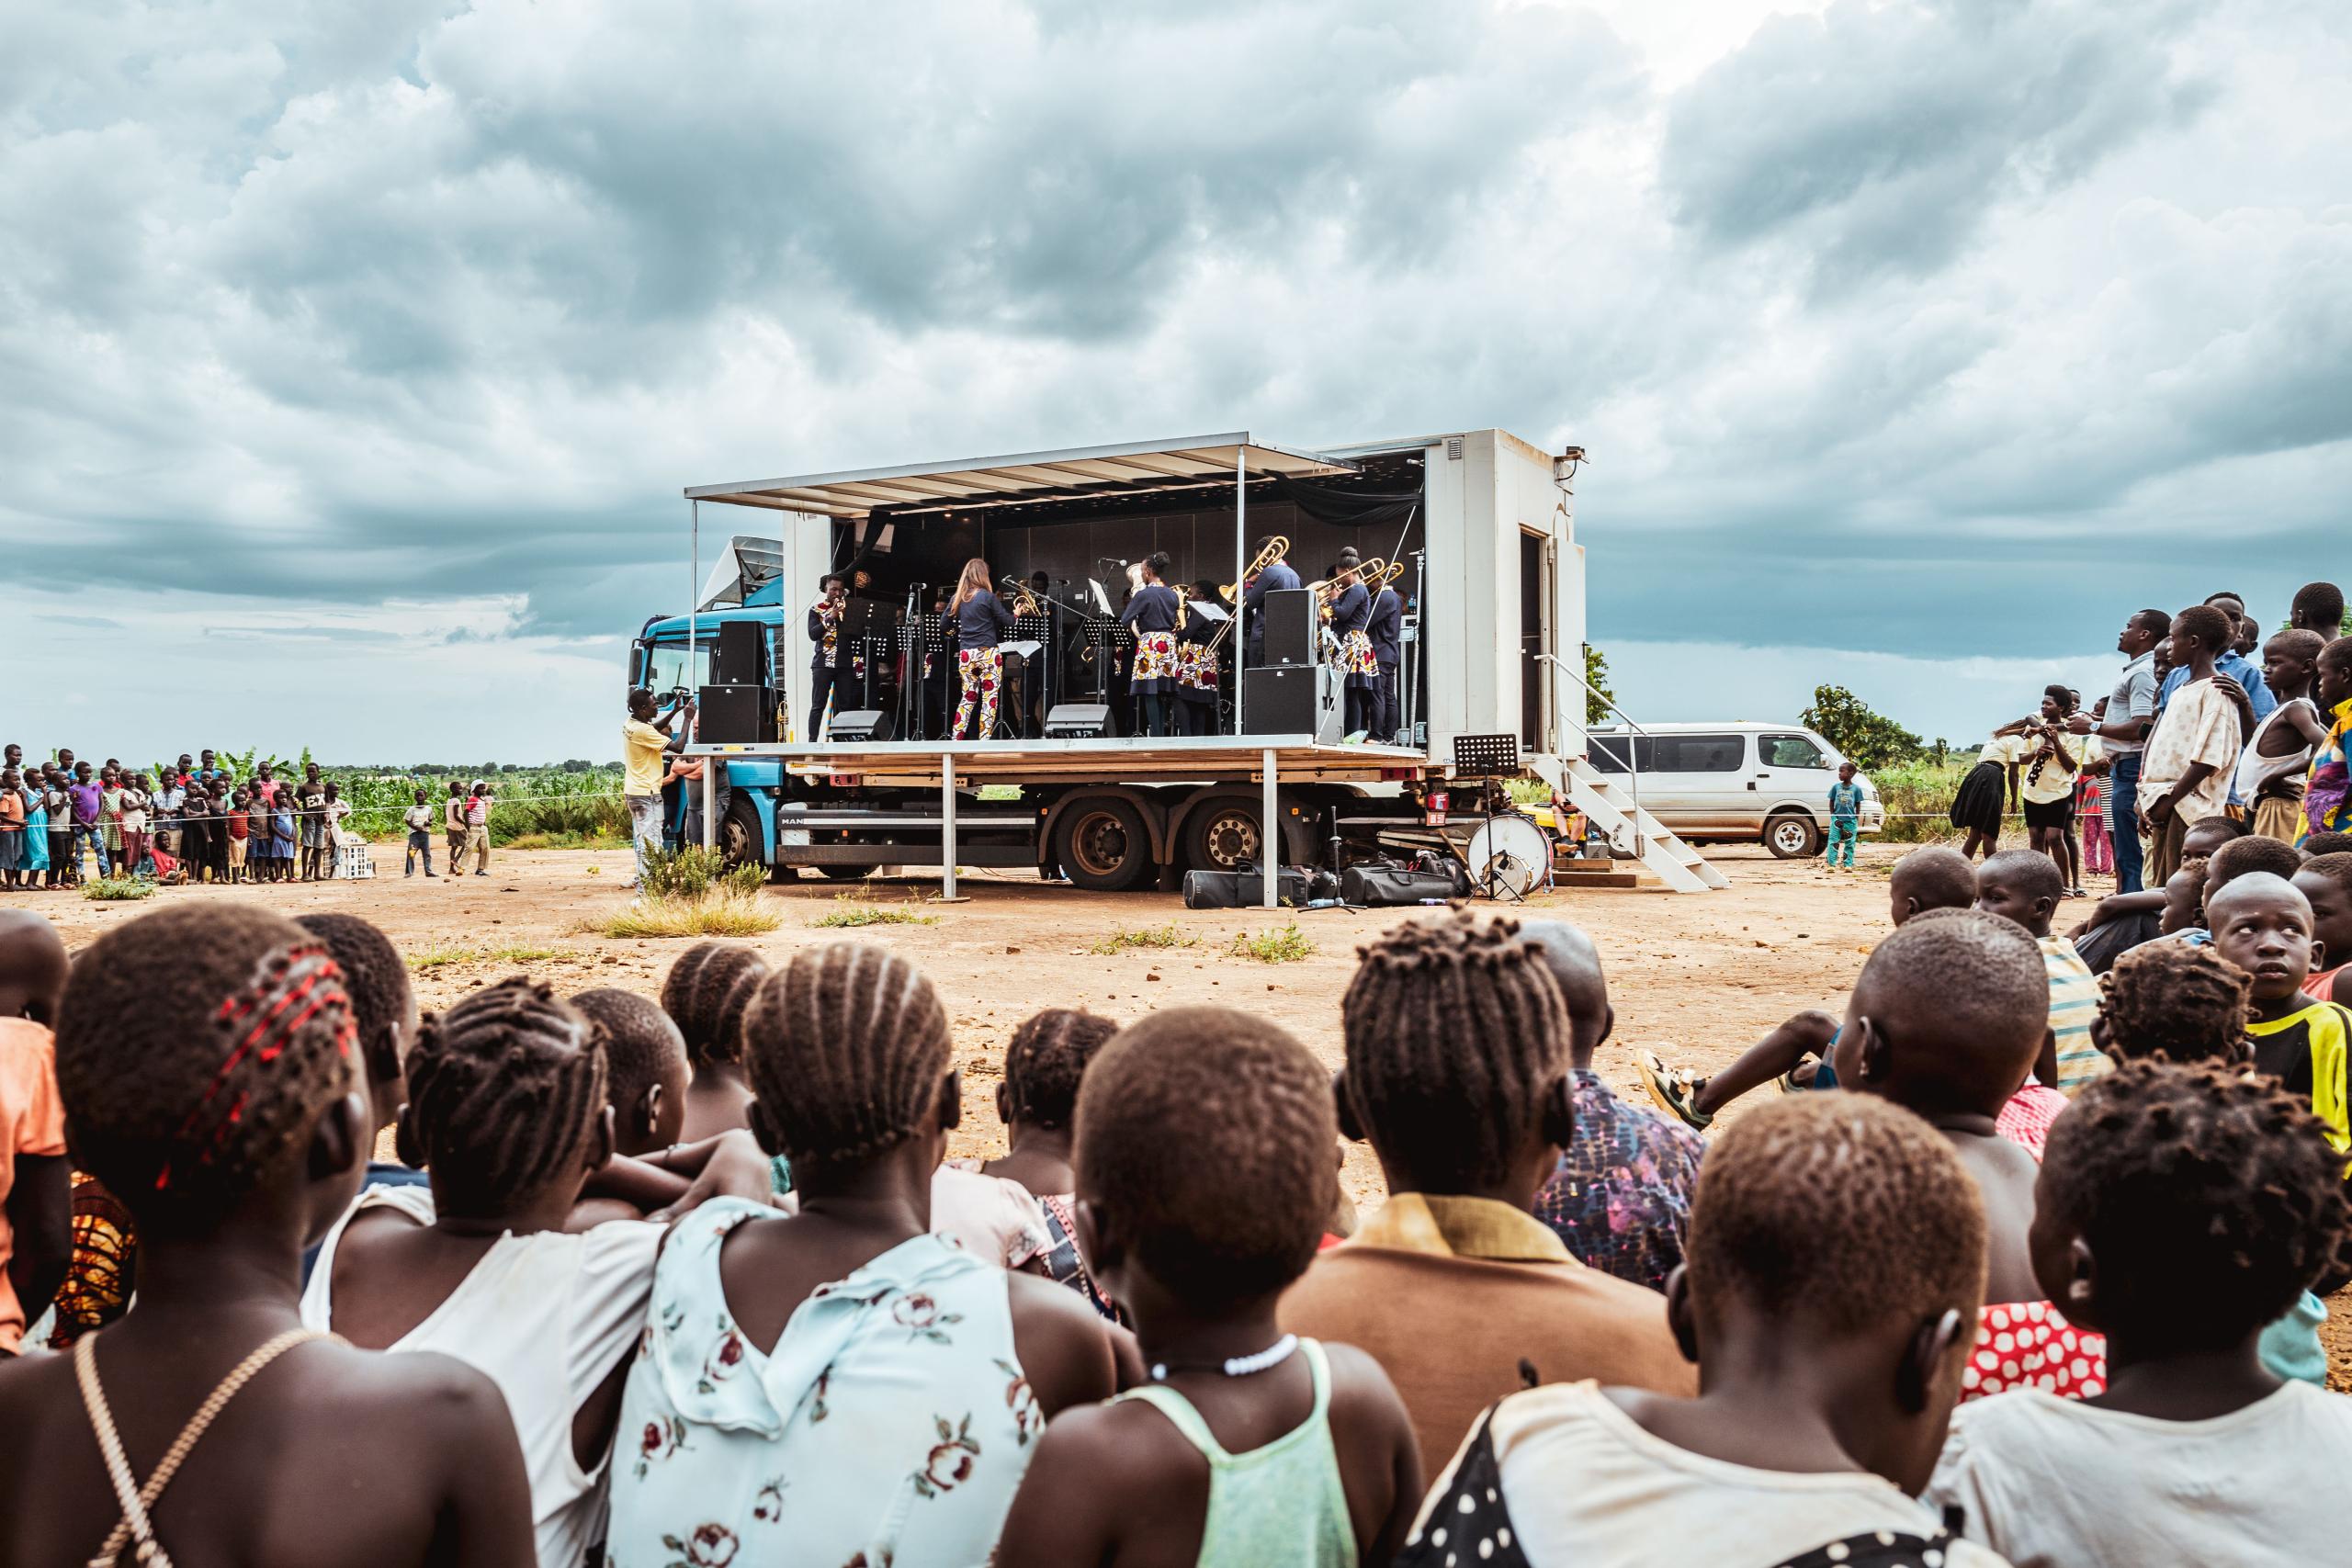 Musicians play a concert in the truck on a fold-out stage